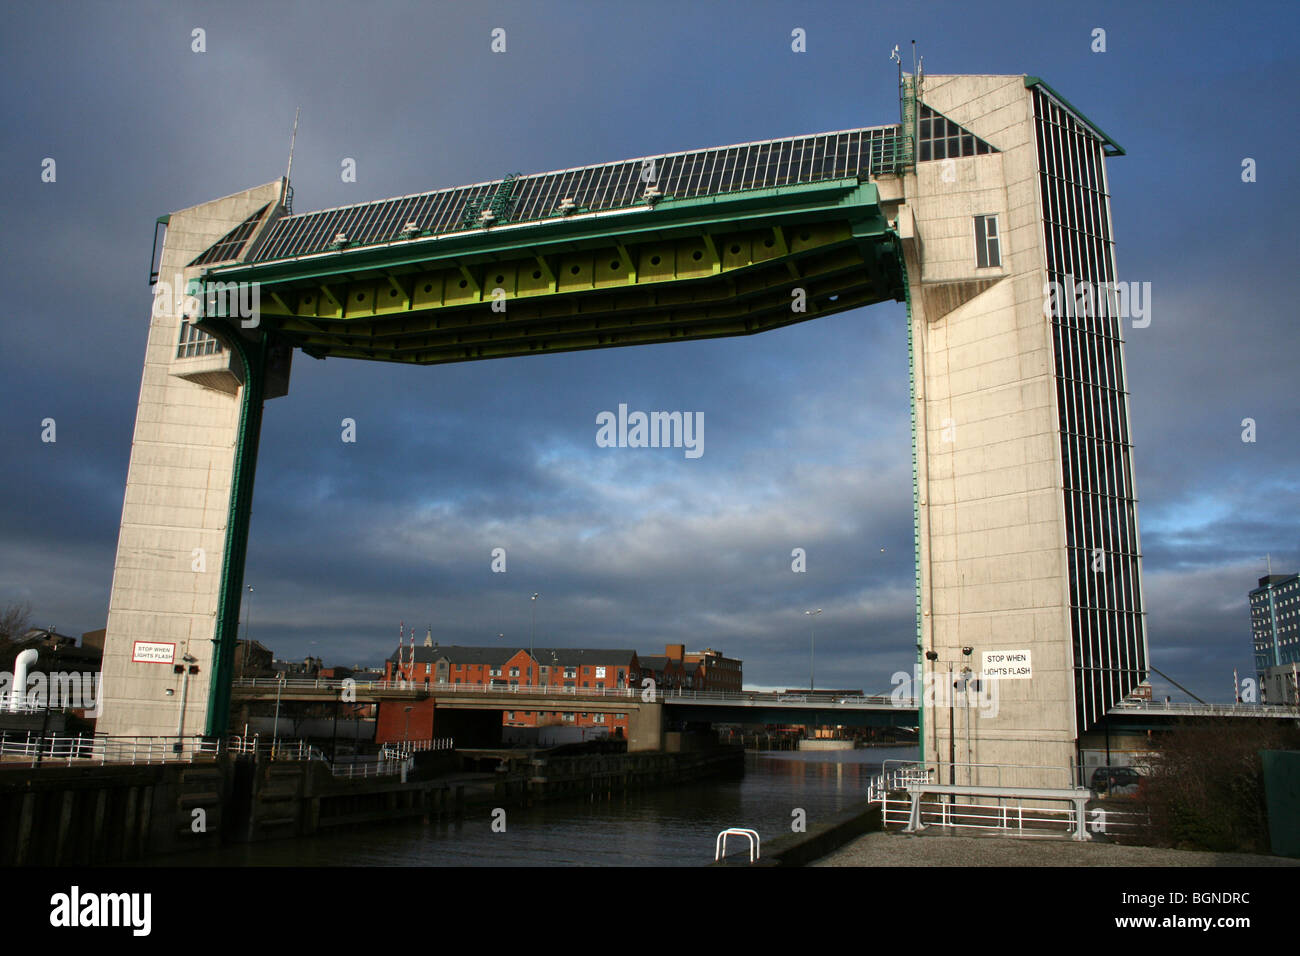 River Hull Tidal Barrier in Hull, East Riding Of Yorkshire, UK Stock Photo